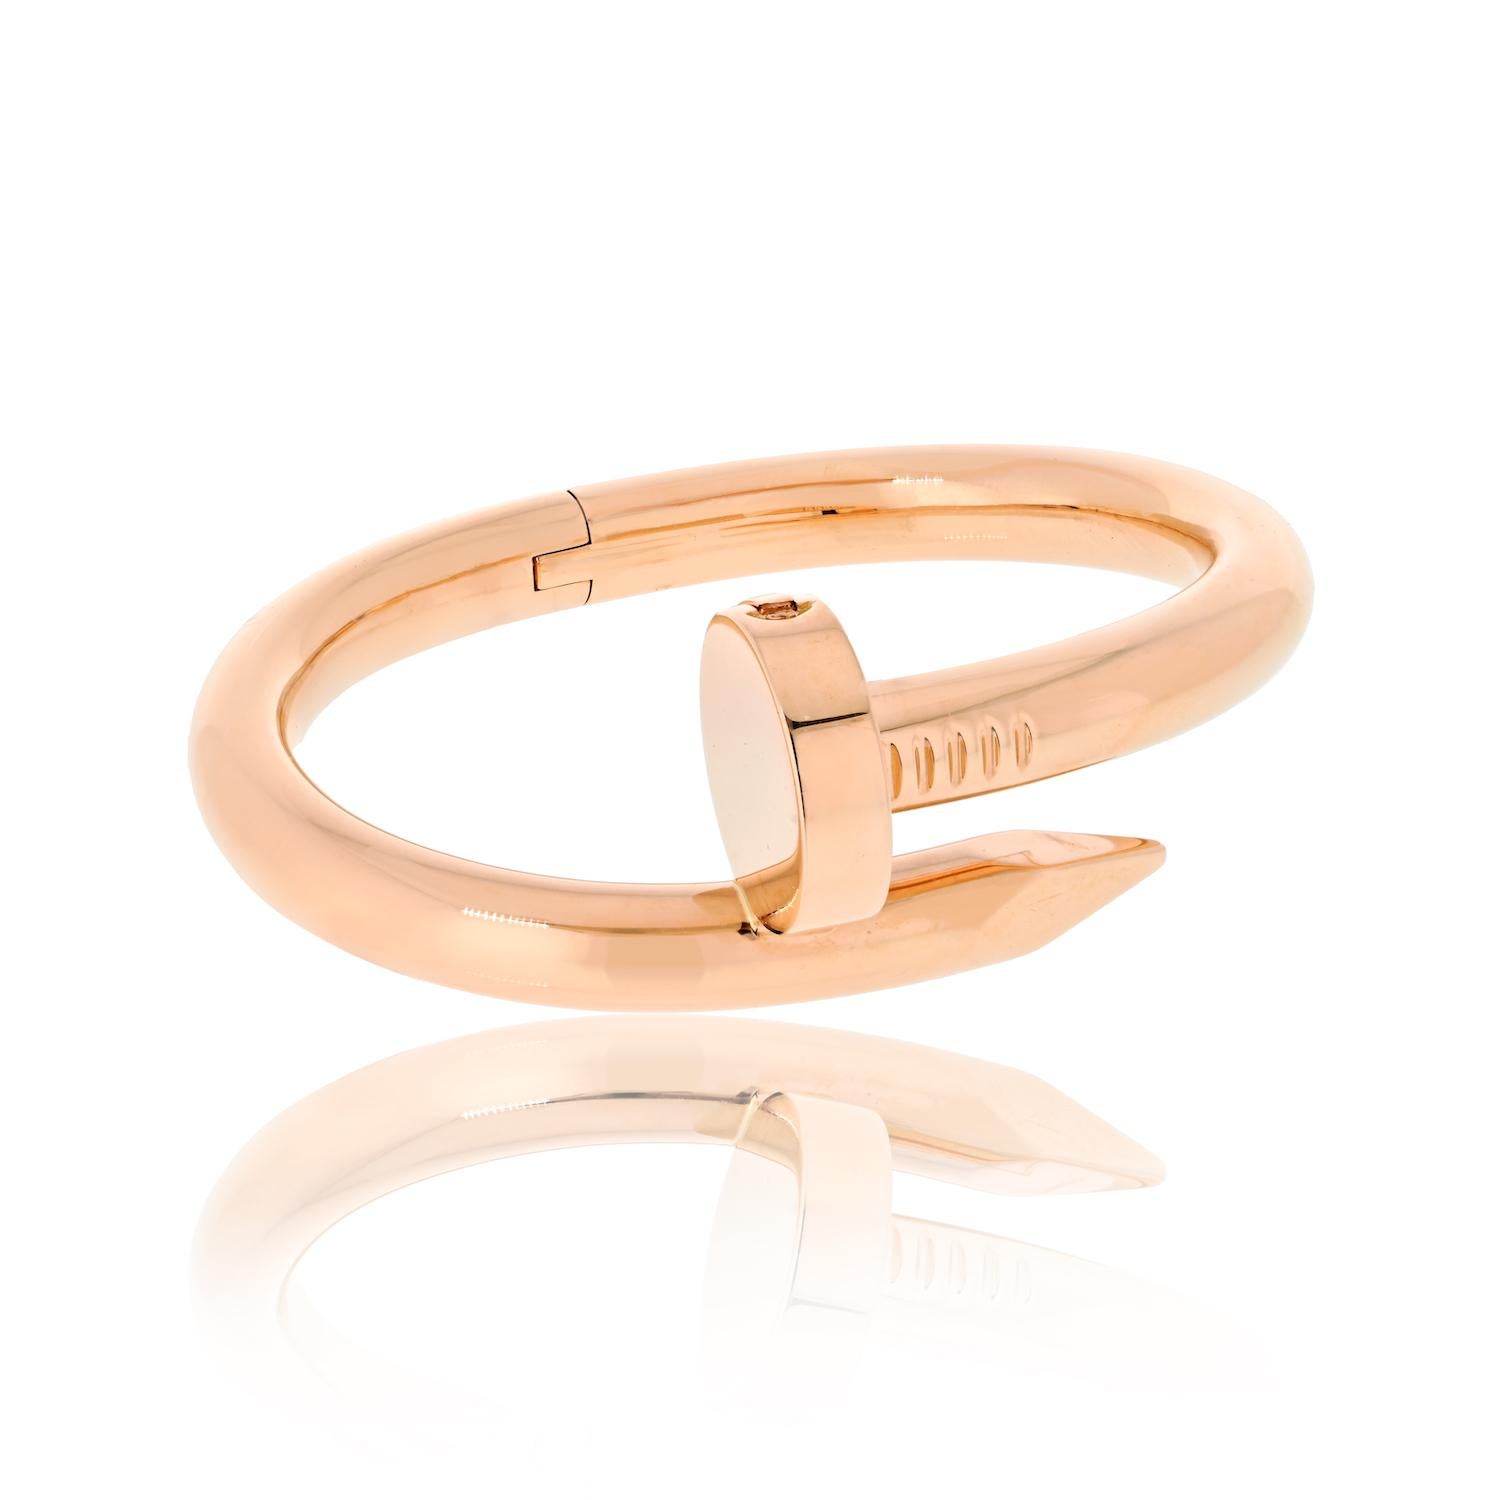 Cartier Juste Un Clou 18K Rose Gold Large Model Size 18 Bracelet.

This magnificent Juste Un Clou bracelet, rendered in exquisite rose gold, is offered in a size 18 to adorn your wrist beautifully. Maintained in excellent condition, this piece is a